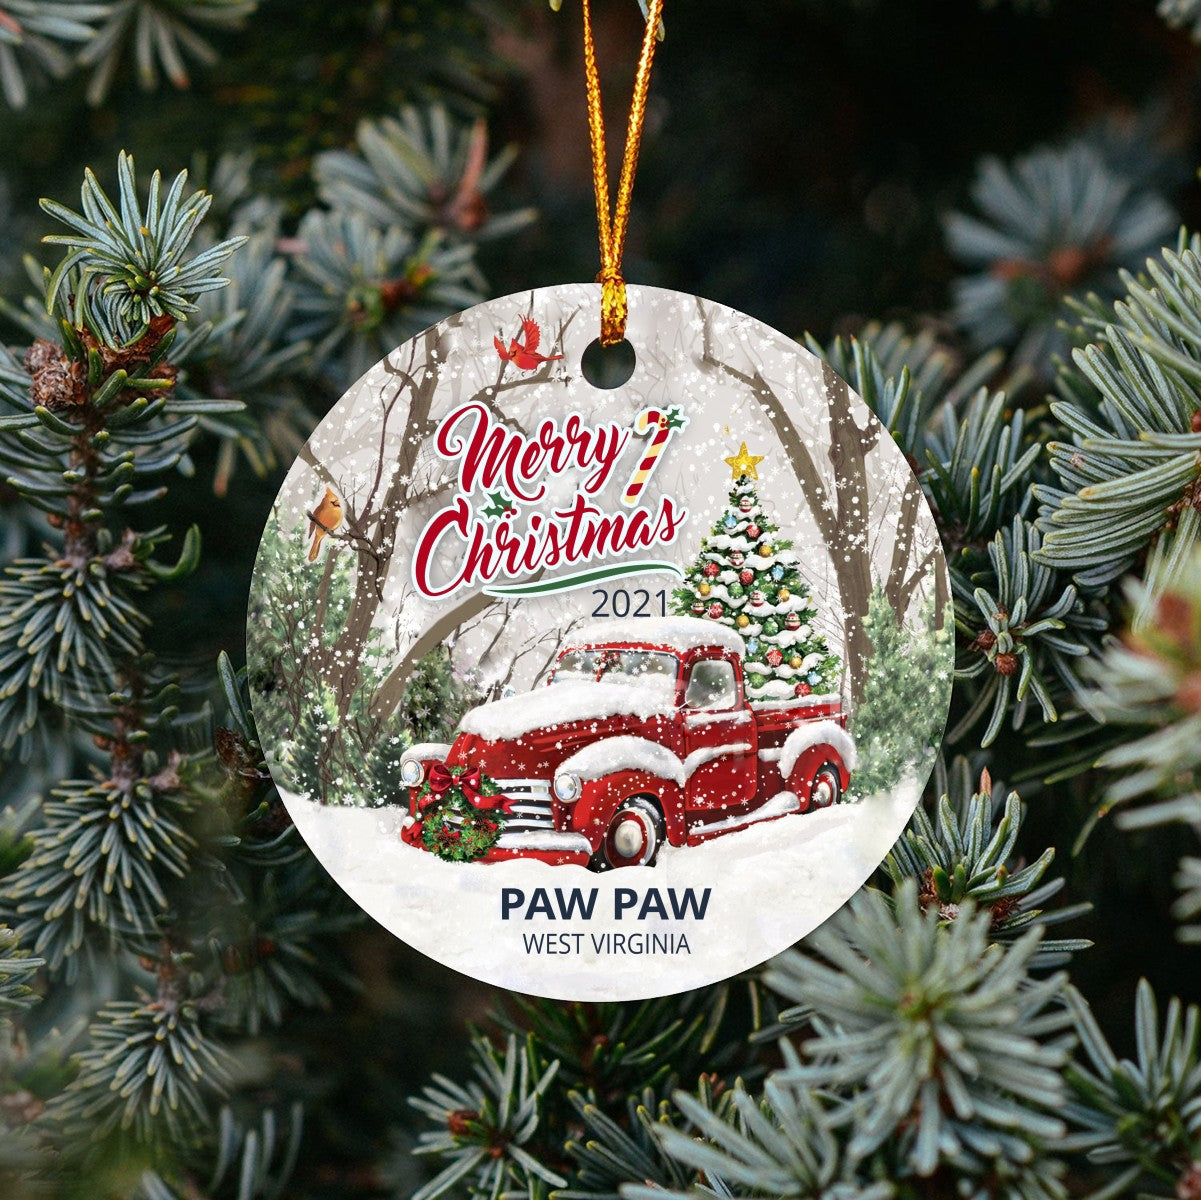 Christmas Tree Ornaments Paw Paw - Ornament With Name City, State Paw Paw West Virginia WV Ornament - Red Truck Xmas Ornaments 3'' Plastic Gift For Family, Friend And Housewarming